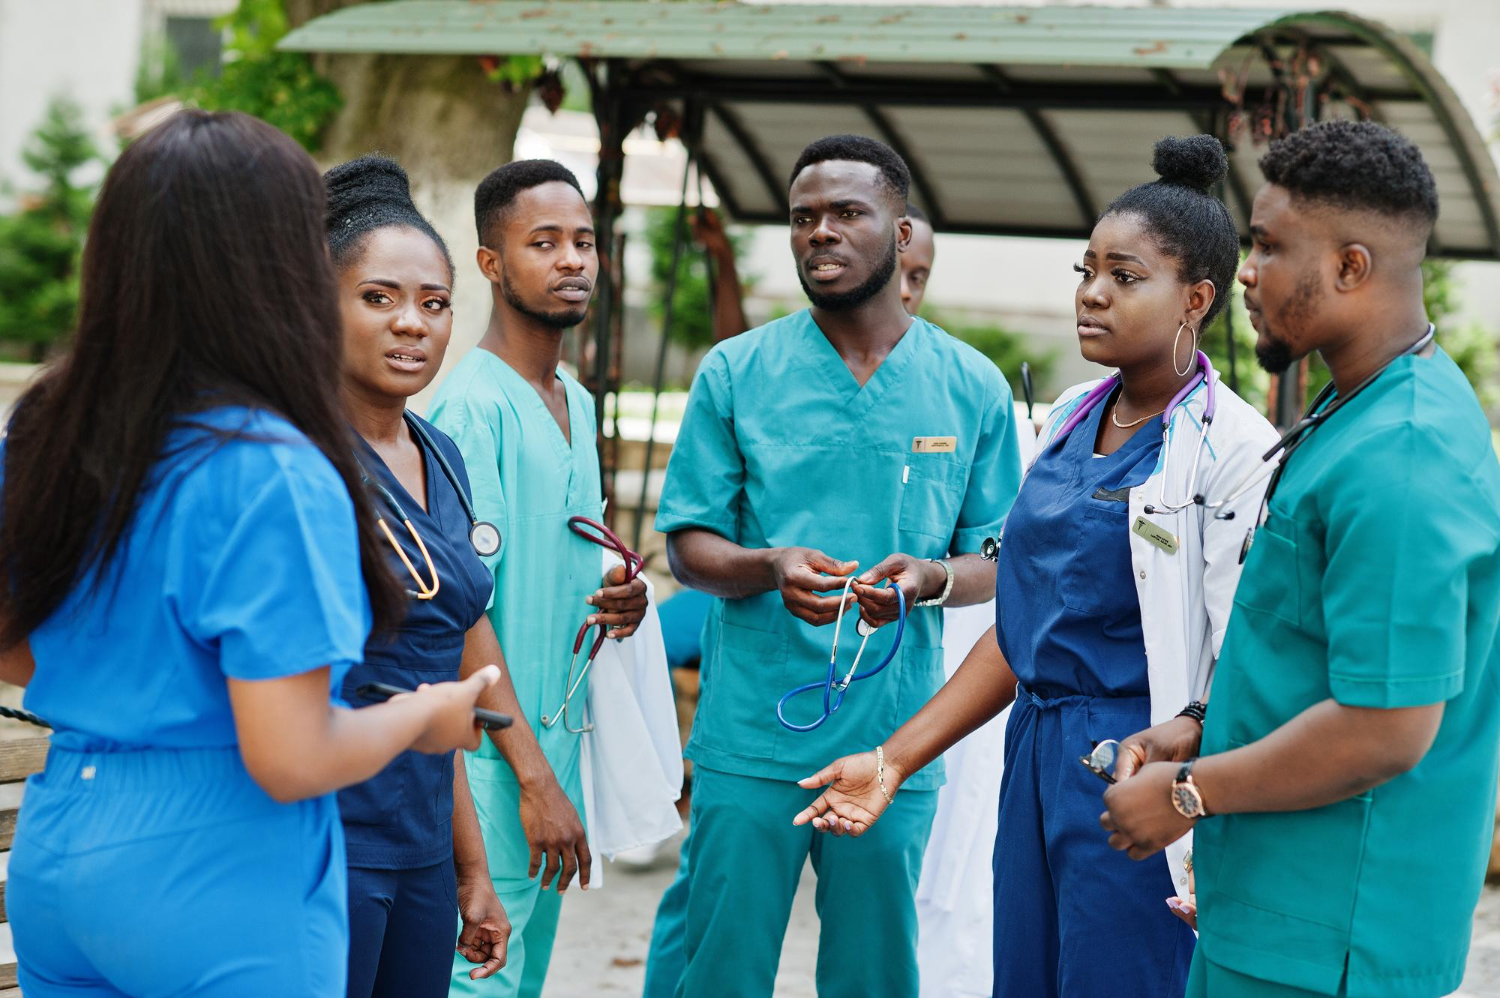 group-of-african-medical-students-posed-outdoor